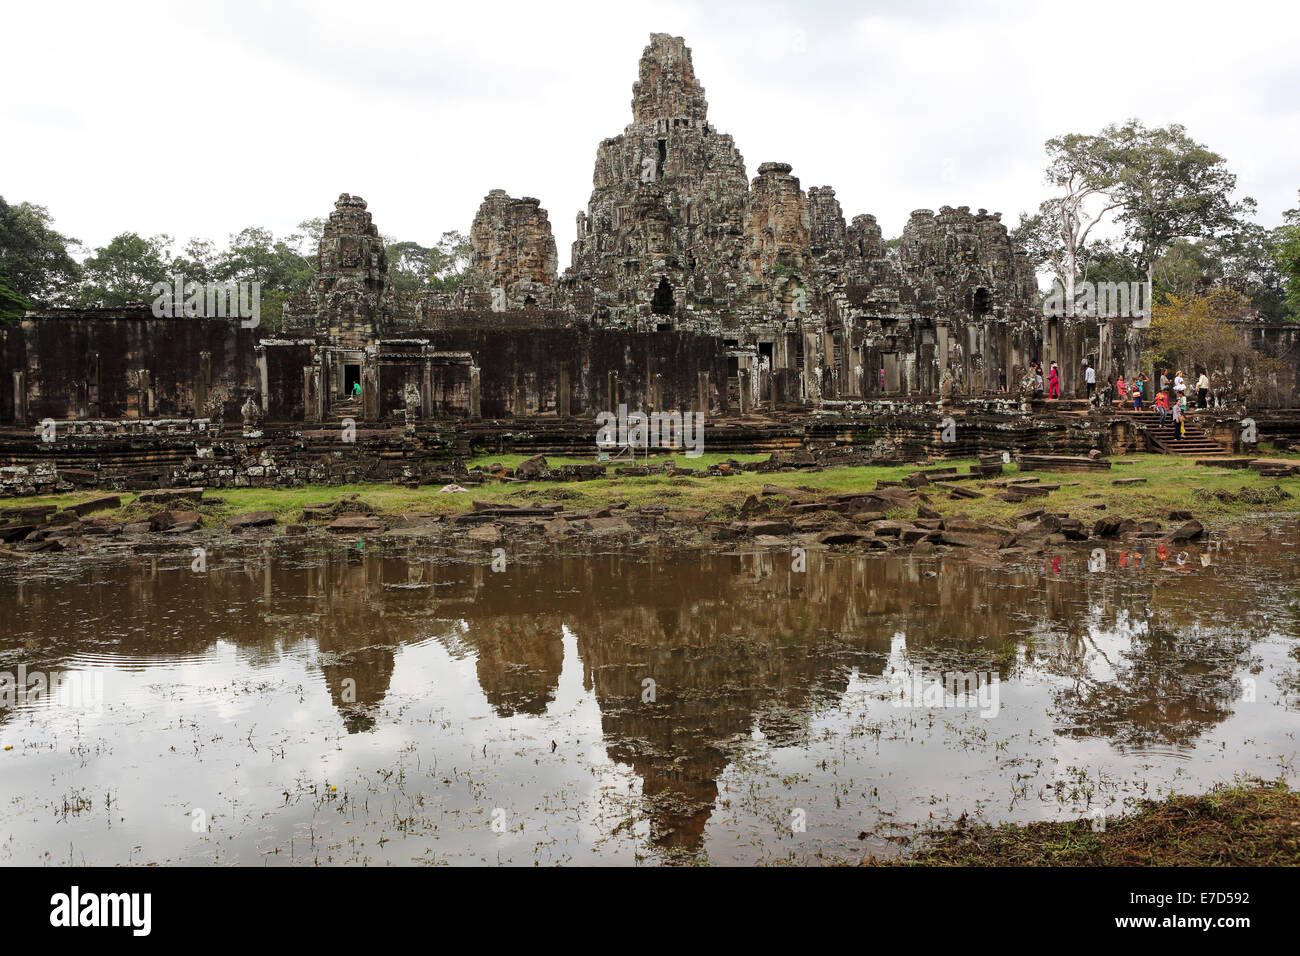 The Bayon temple, part of Angkor Wat, during the monsoon season, in Siem Reap, Cambodia. Stock Photo